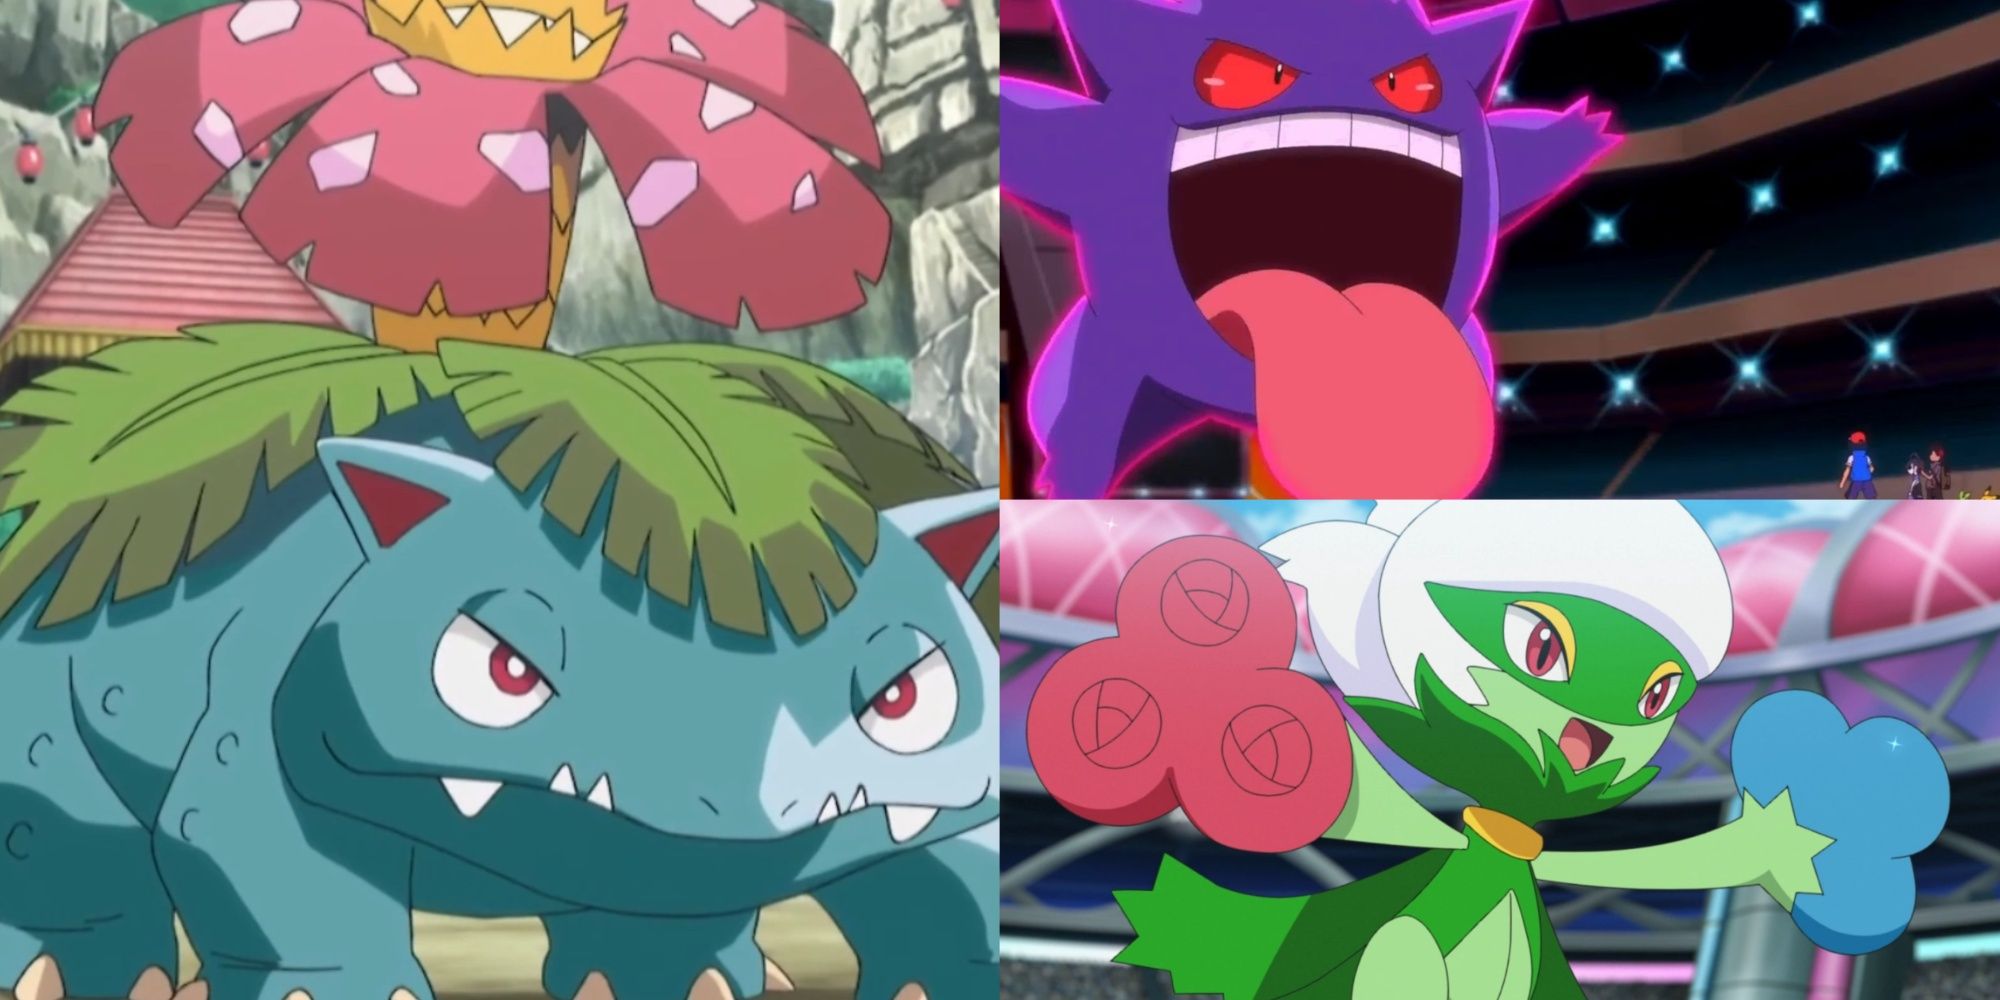 Venusaur, Gengar and Roserade as the top contenders of Poison Type Pokemon